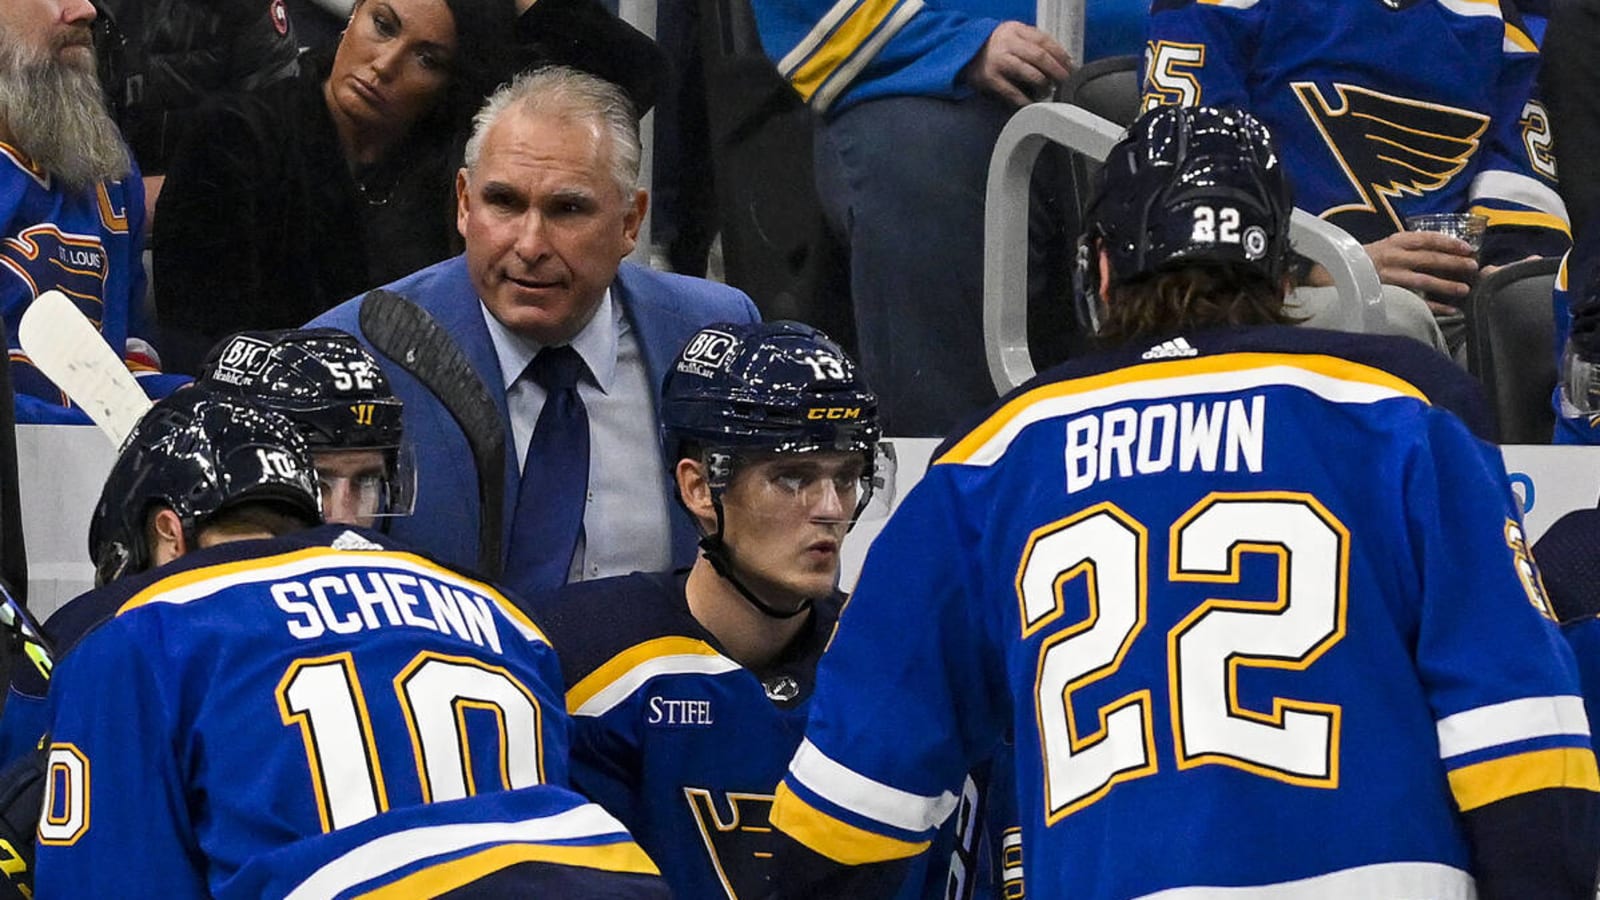 NHL power rankings: St. Louis Blues finally hit a high note